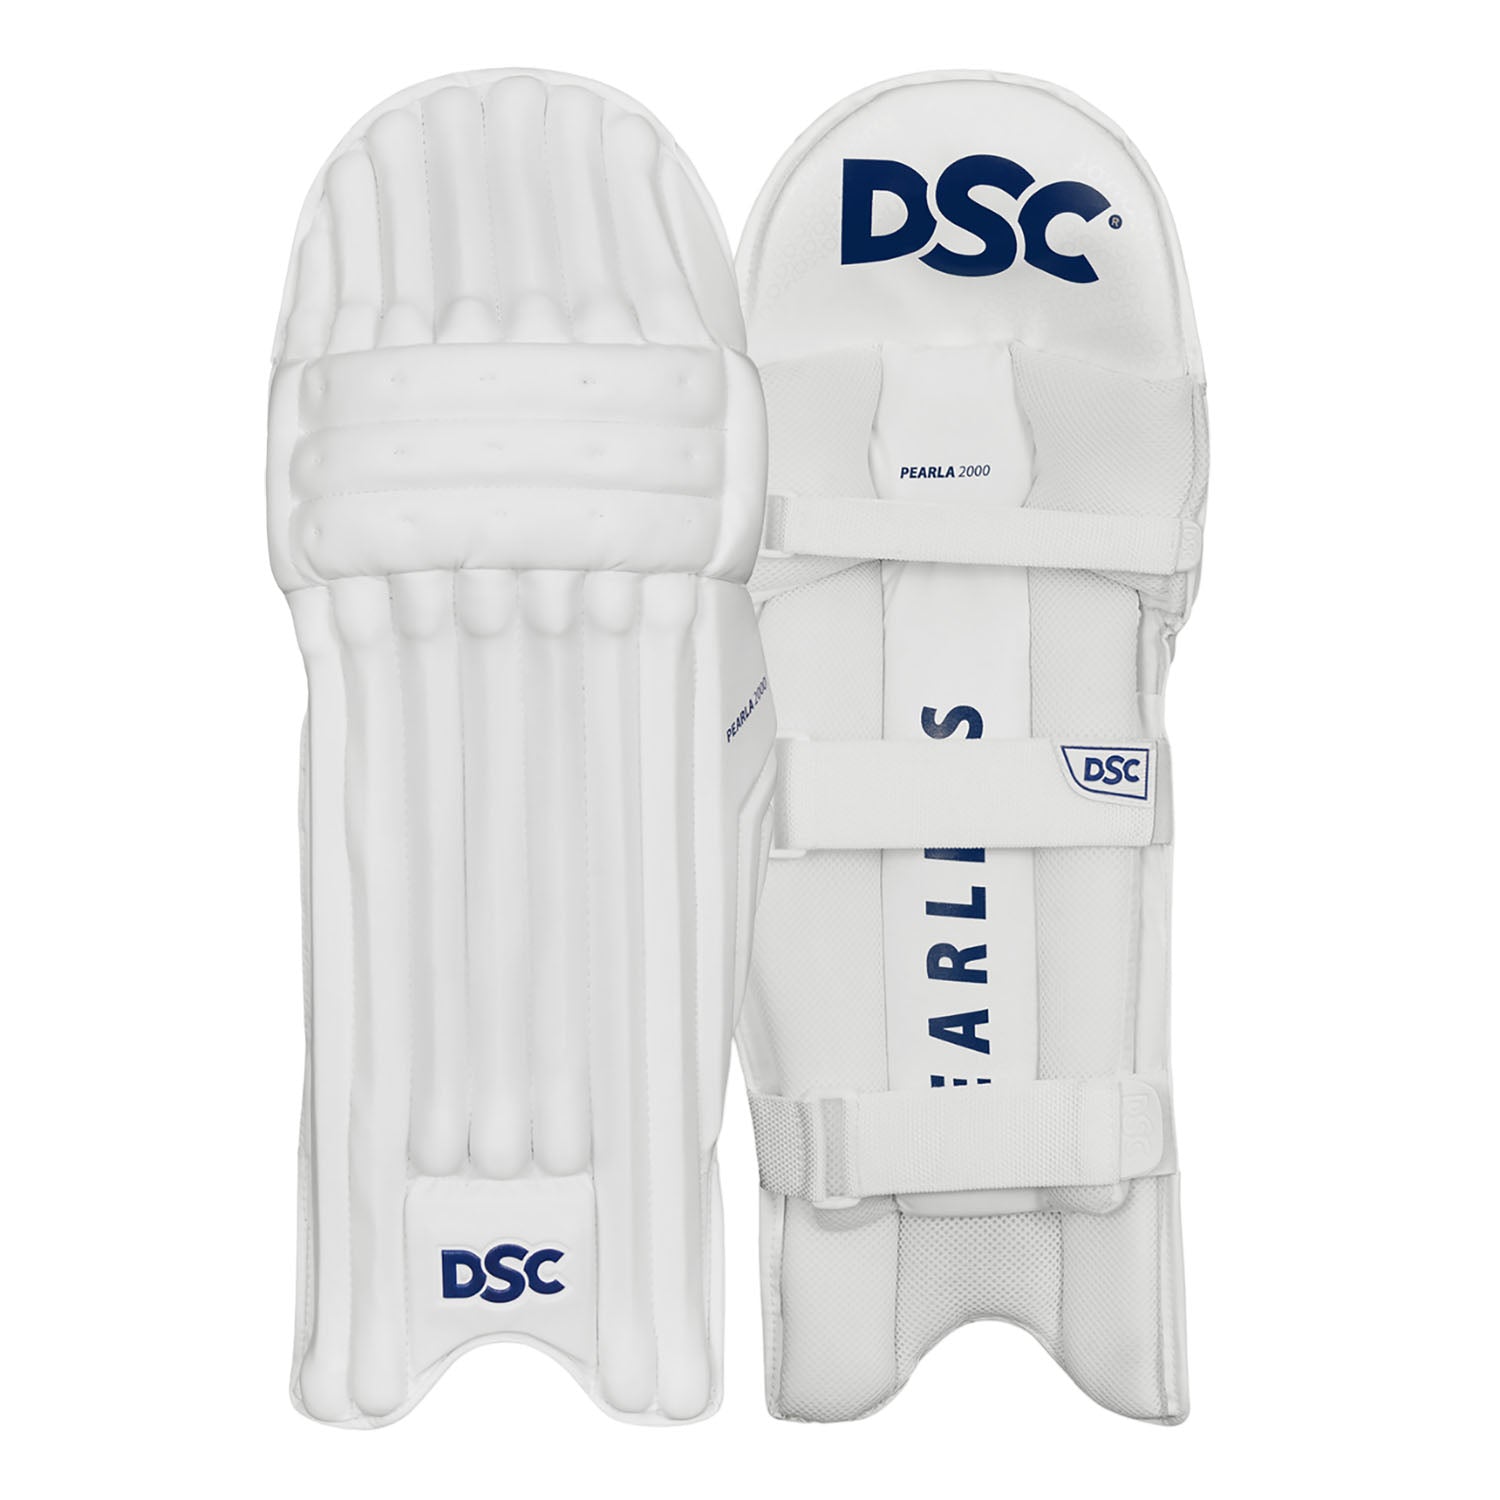 DSC Pearla 2000 Cricket Batting Pad - Buy from Stagsports Cricket Store